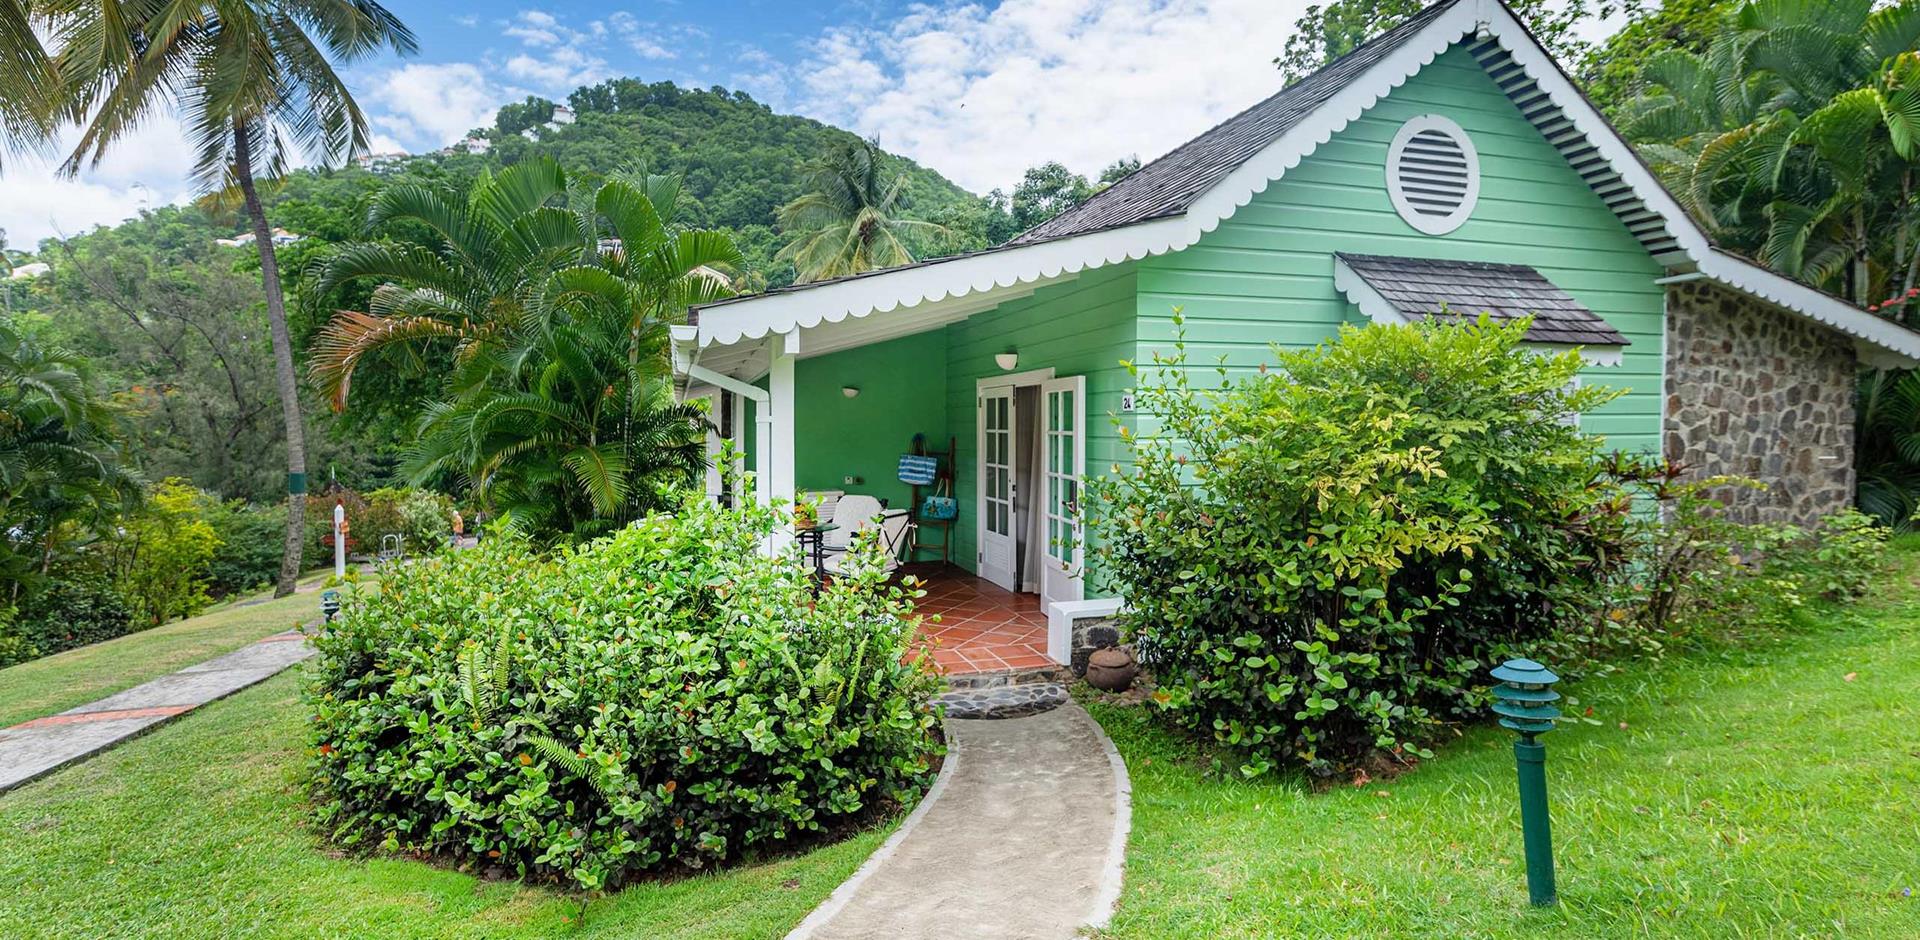 Deluxe Cottage, East Winds, St Lucia, Caribbean, A&K